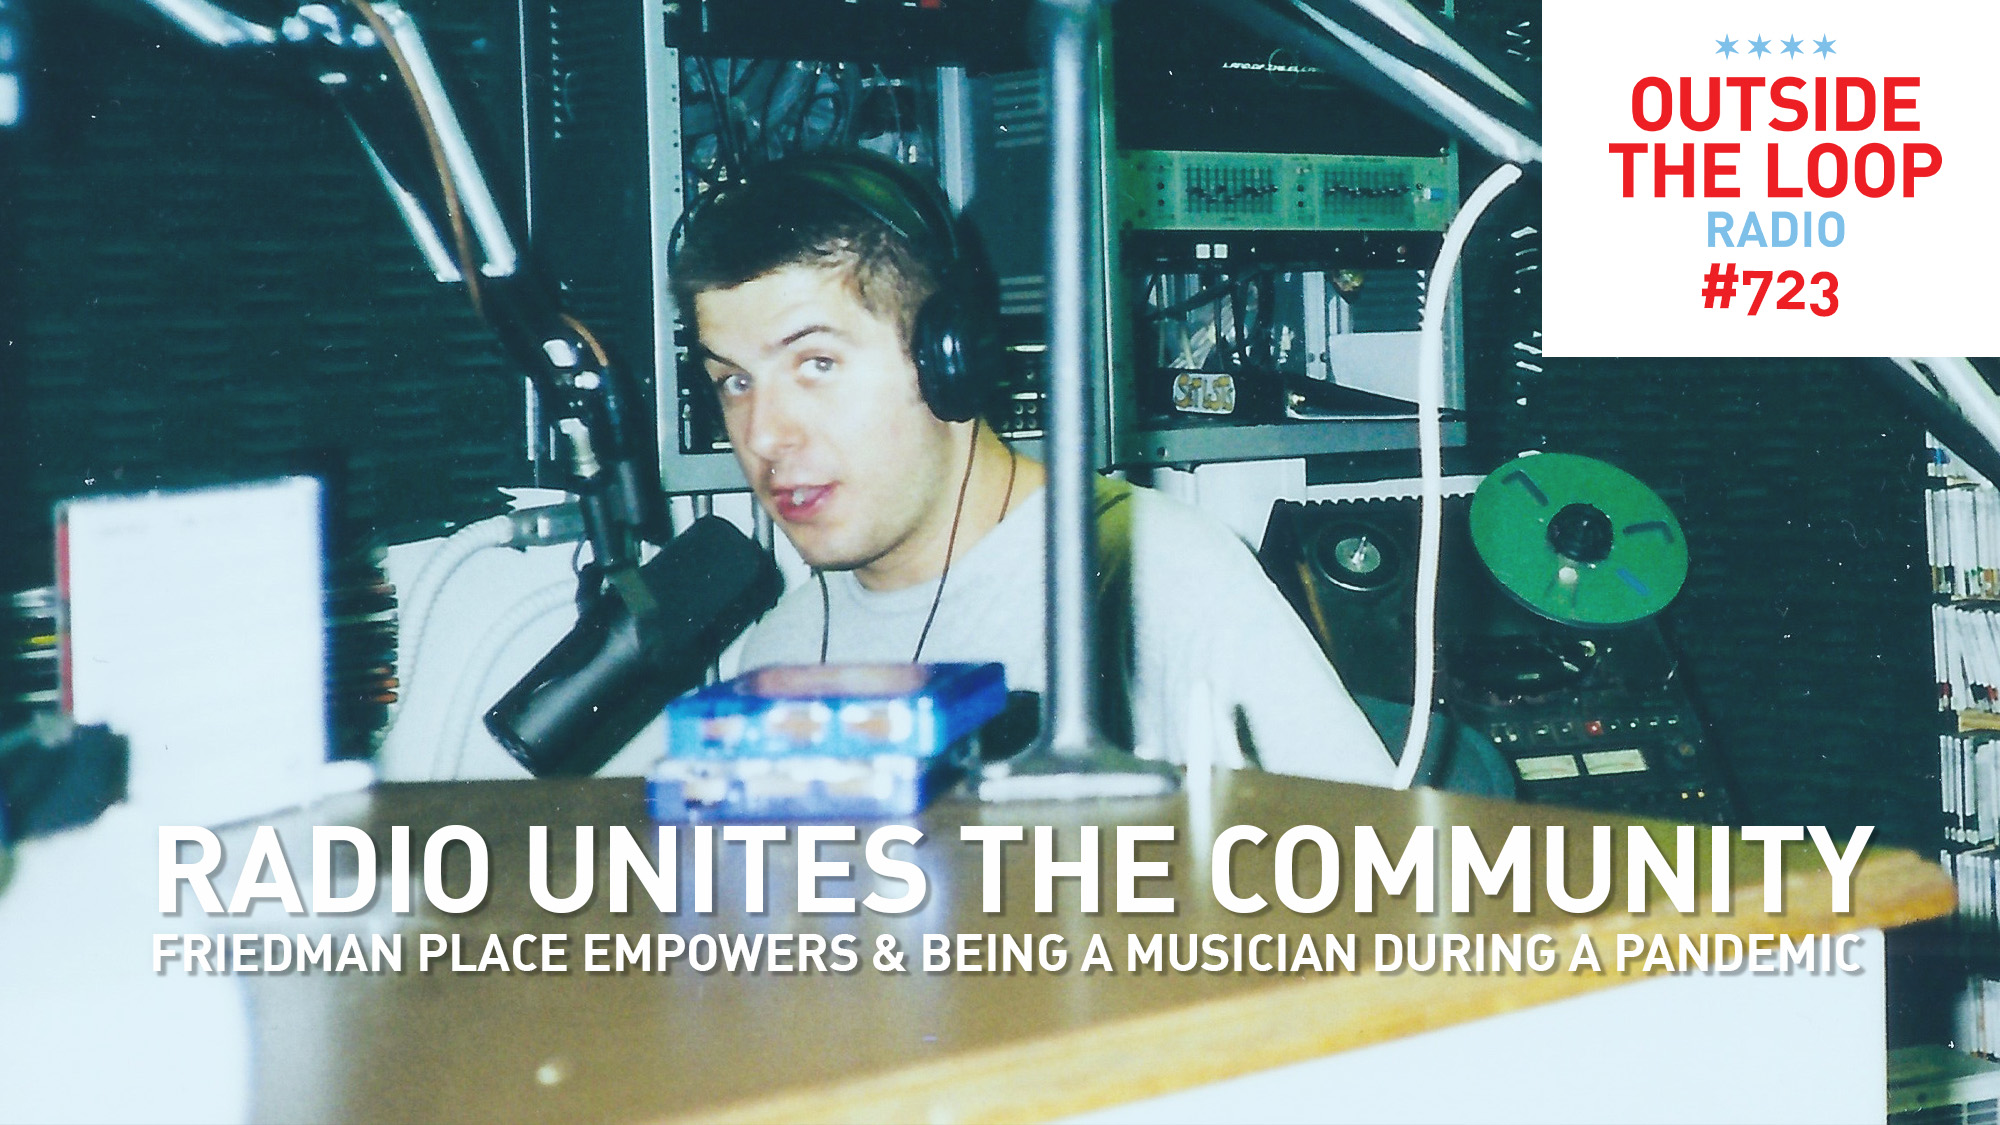 Mike Stephen broadcasts from WLUW-FM, a community radio station at the time, circa 1999.